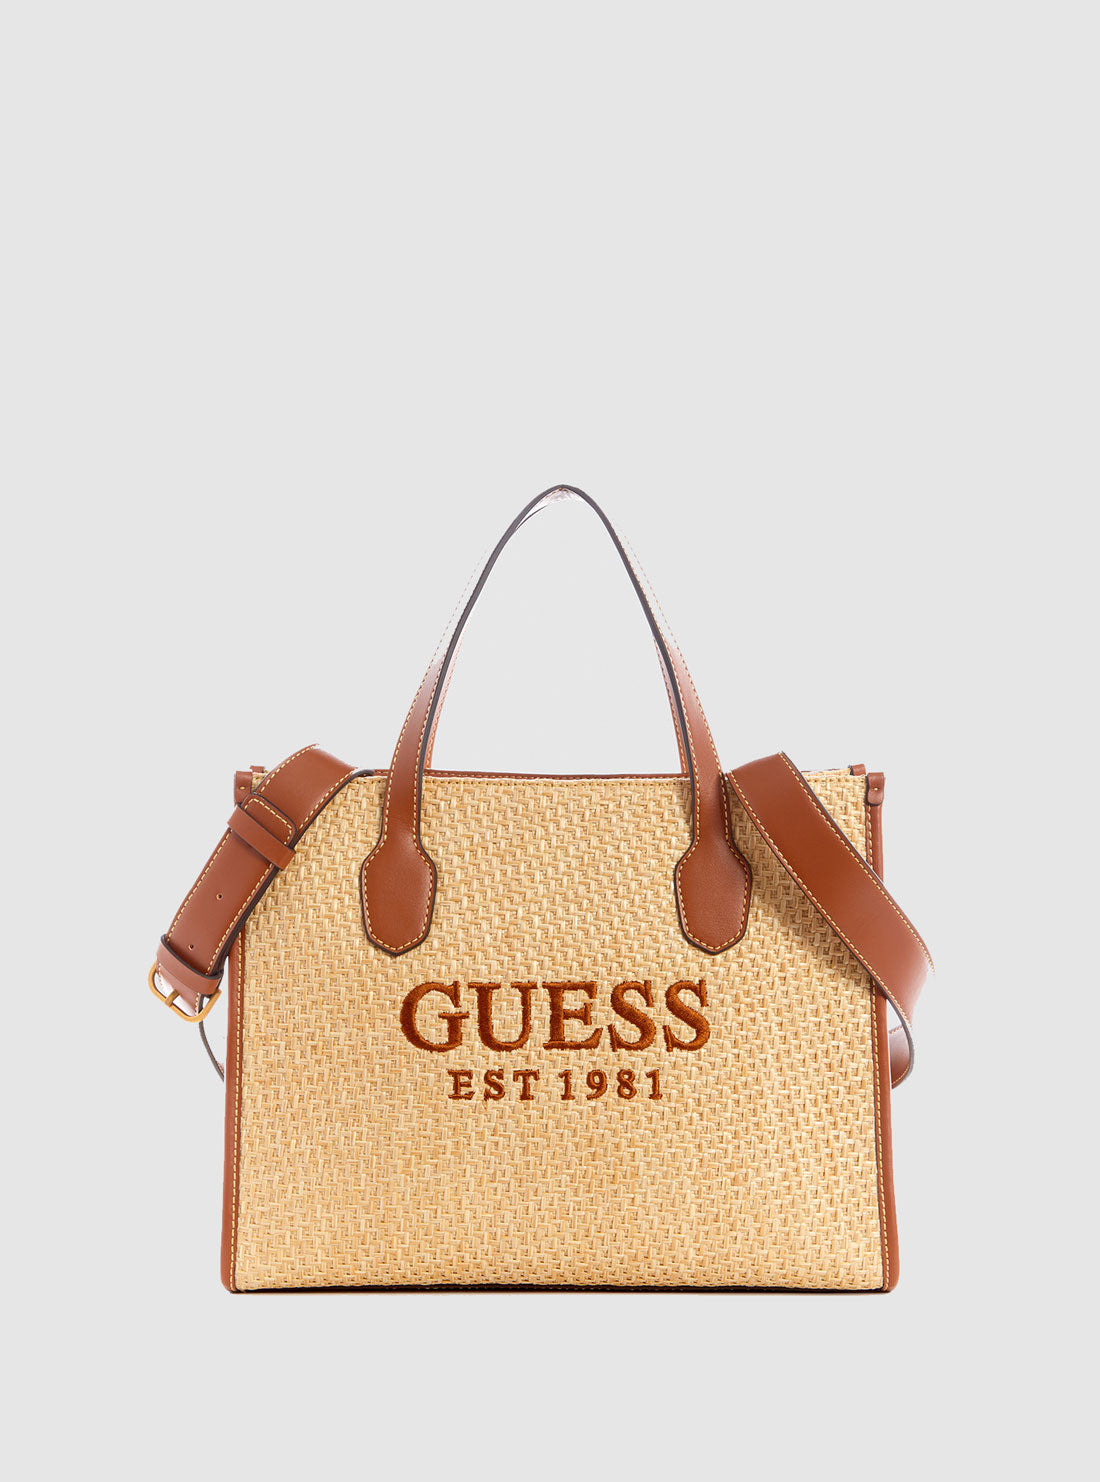 GUESS Women's Cognac Silvana Small Tote Bag WS866522 Front View